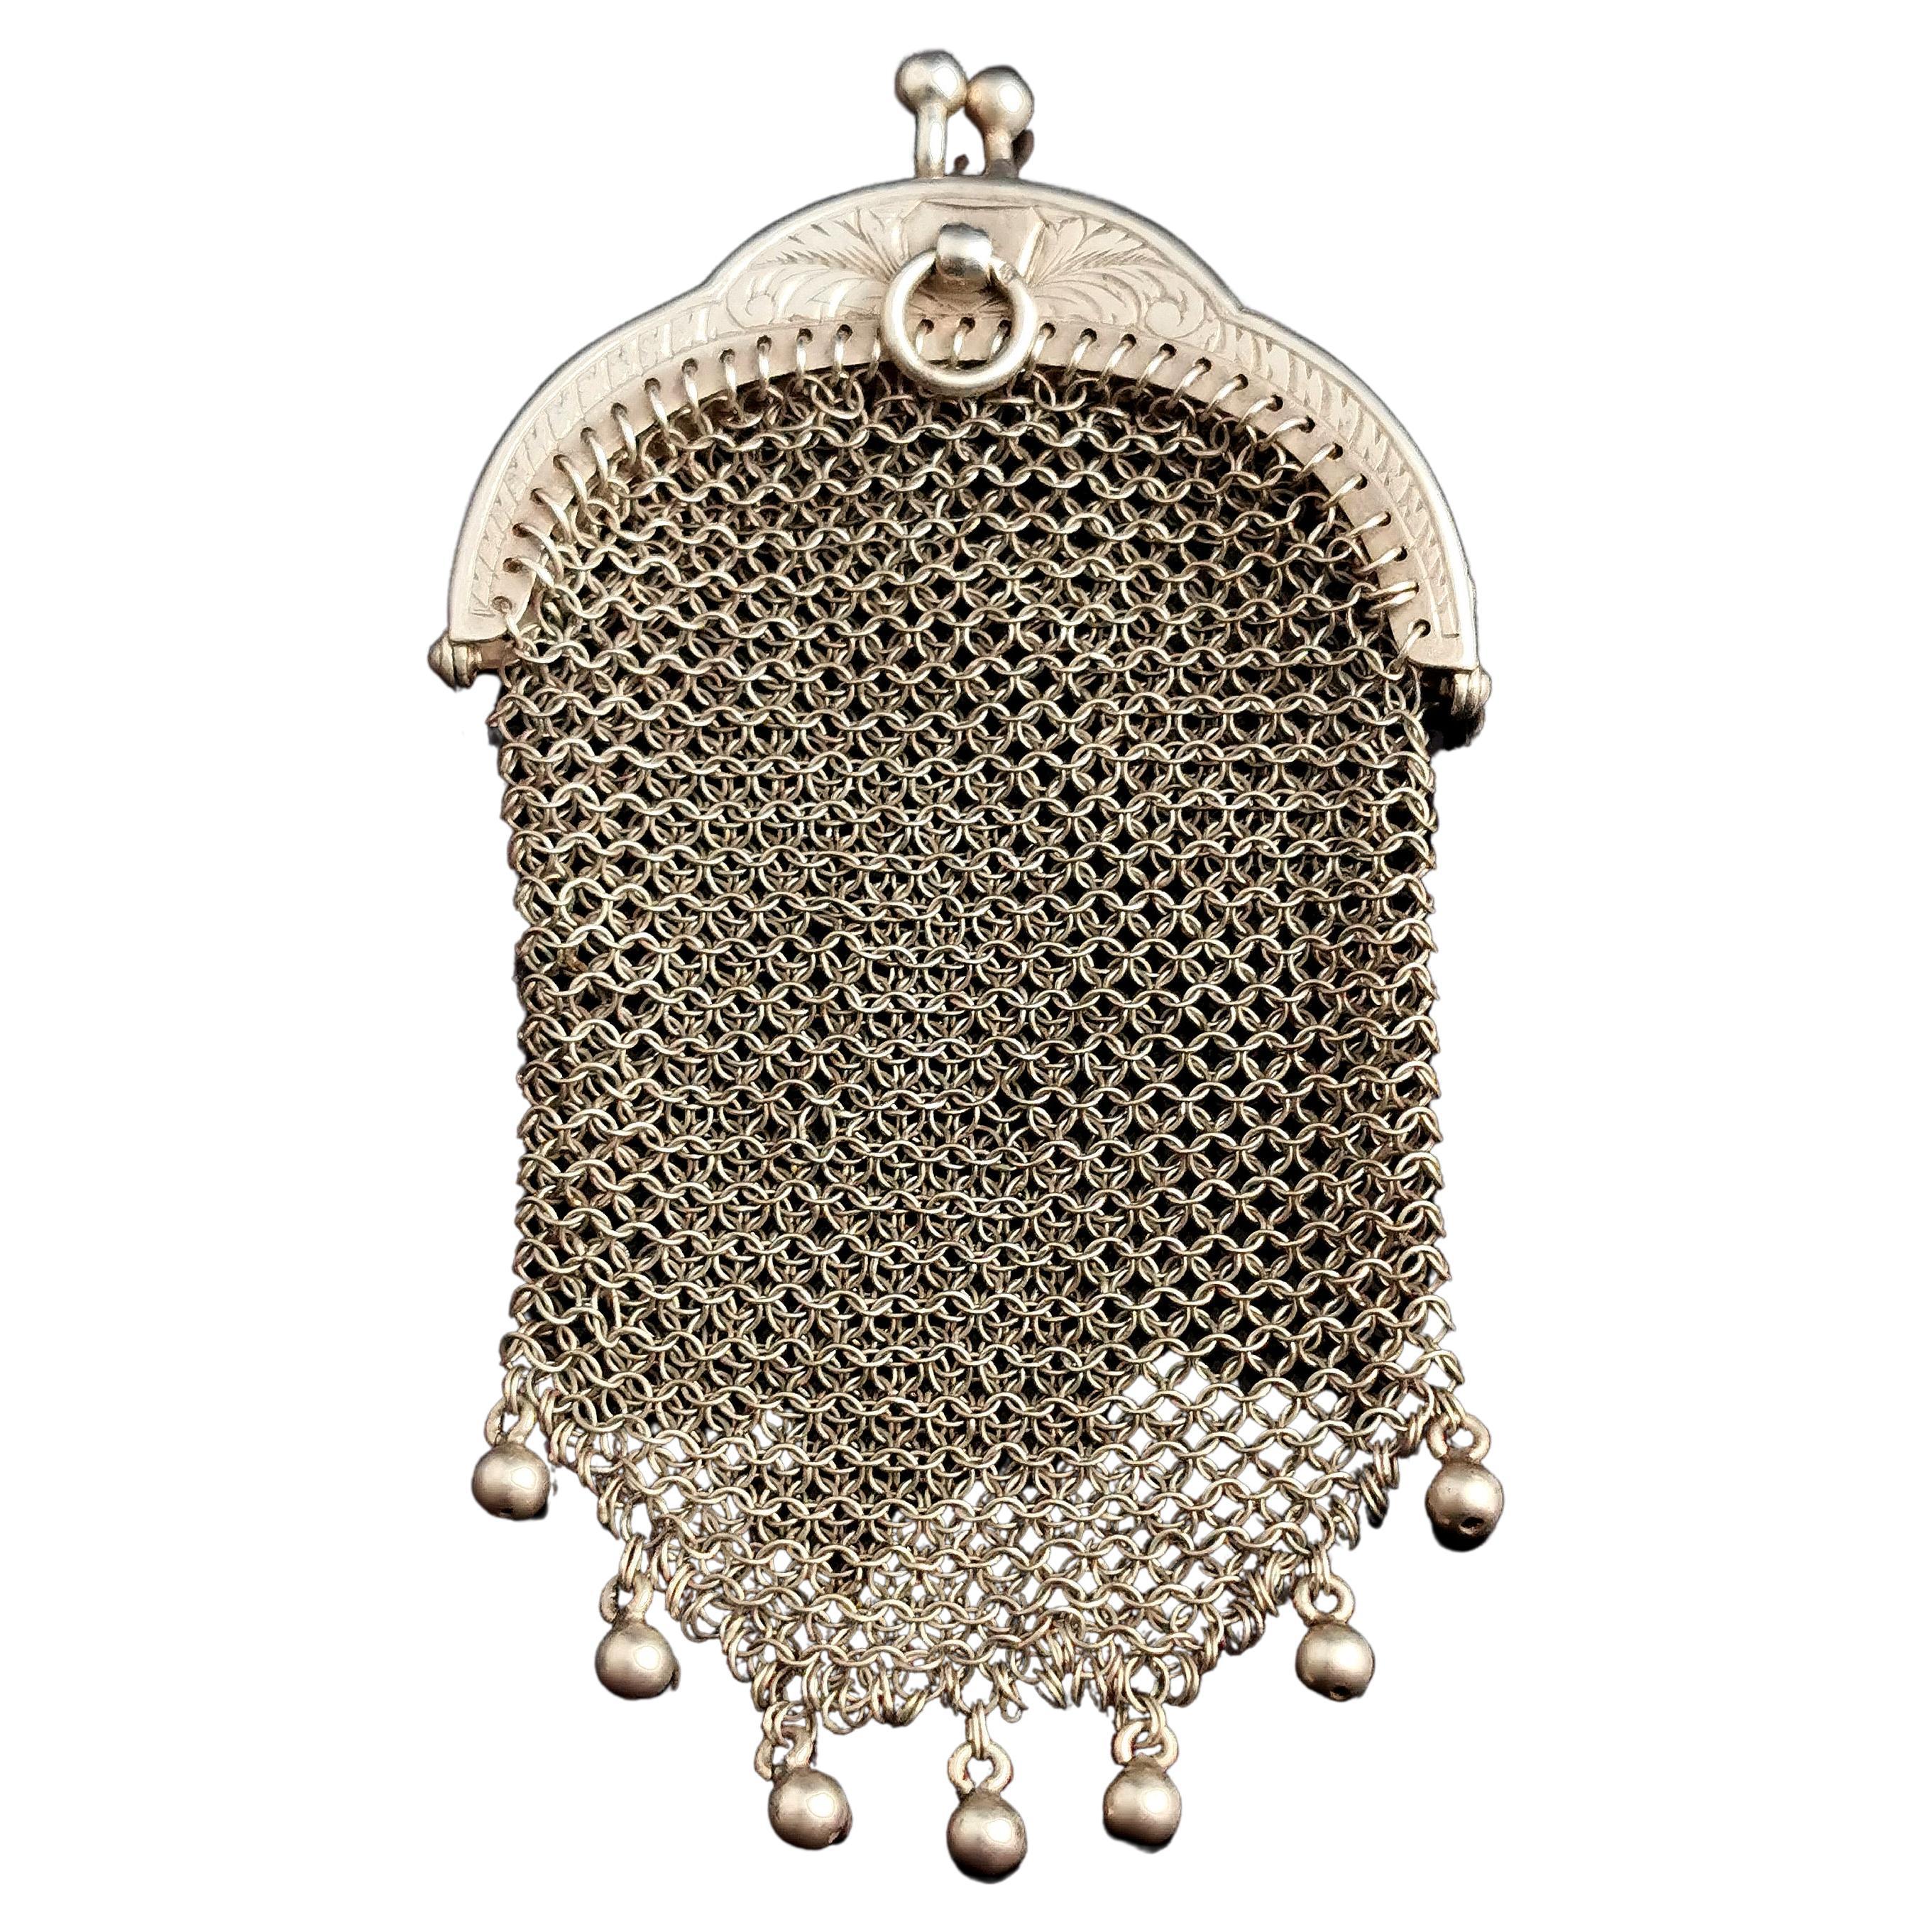 Antique French silver coin purse, Chatelaine purse, mesh 